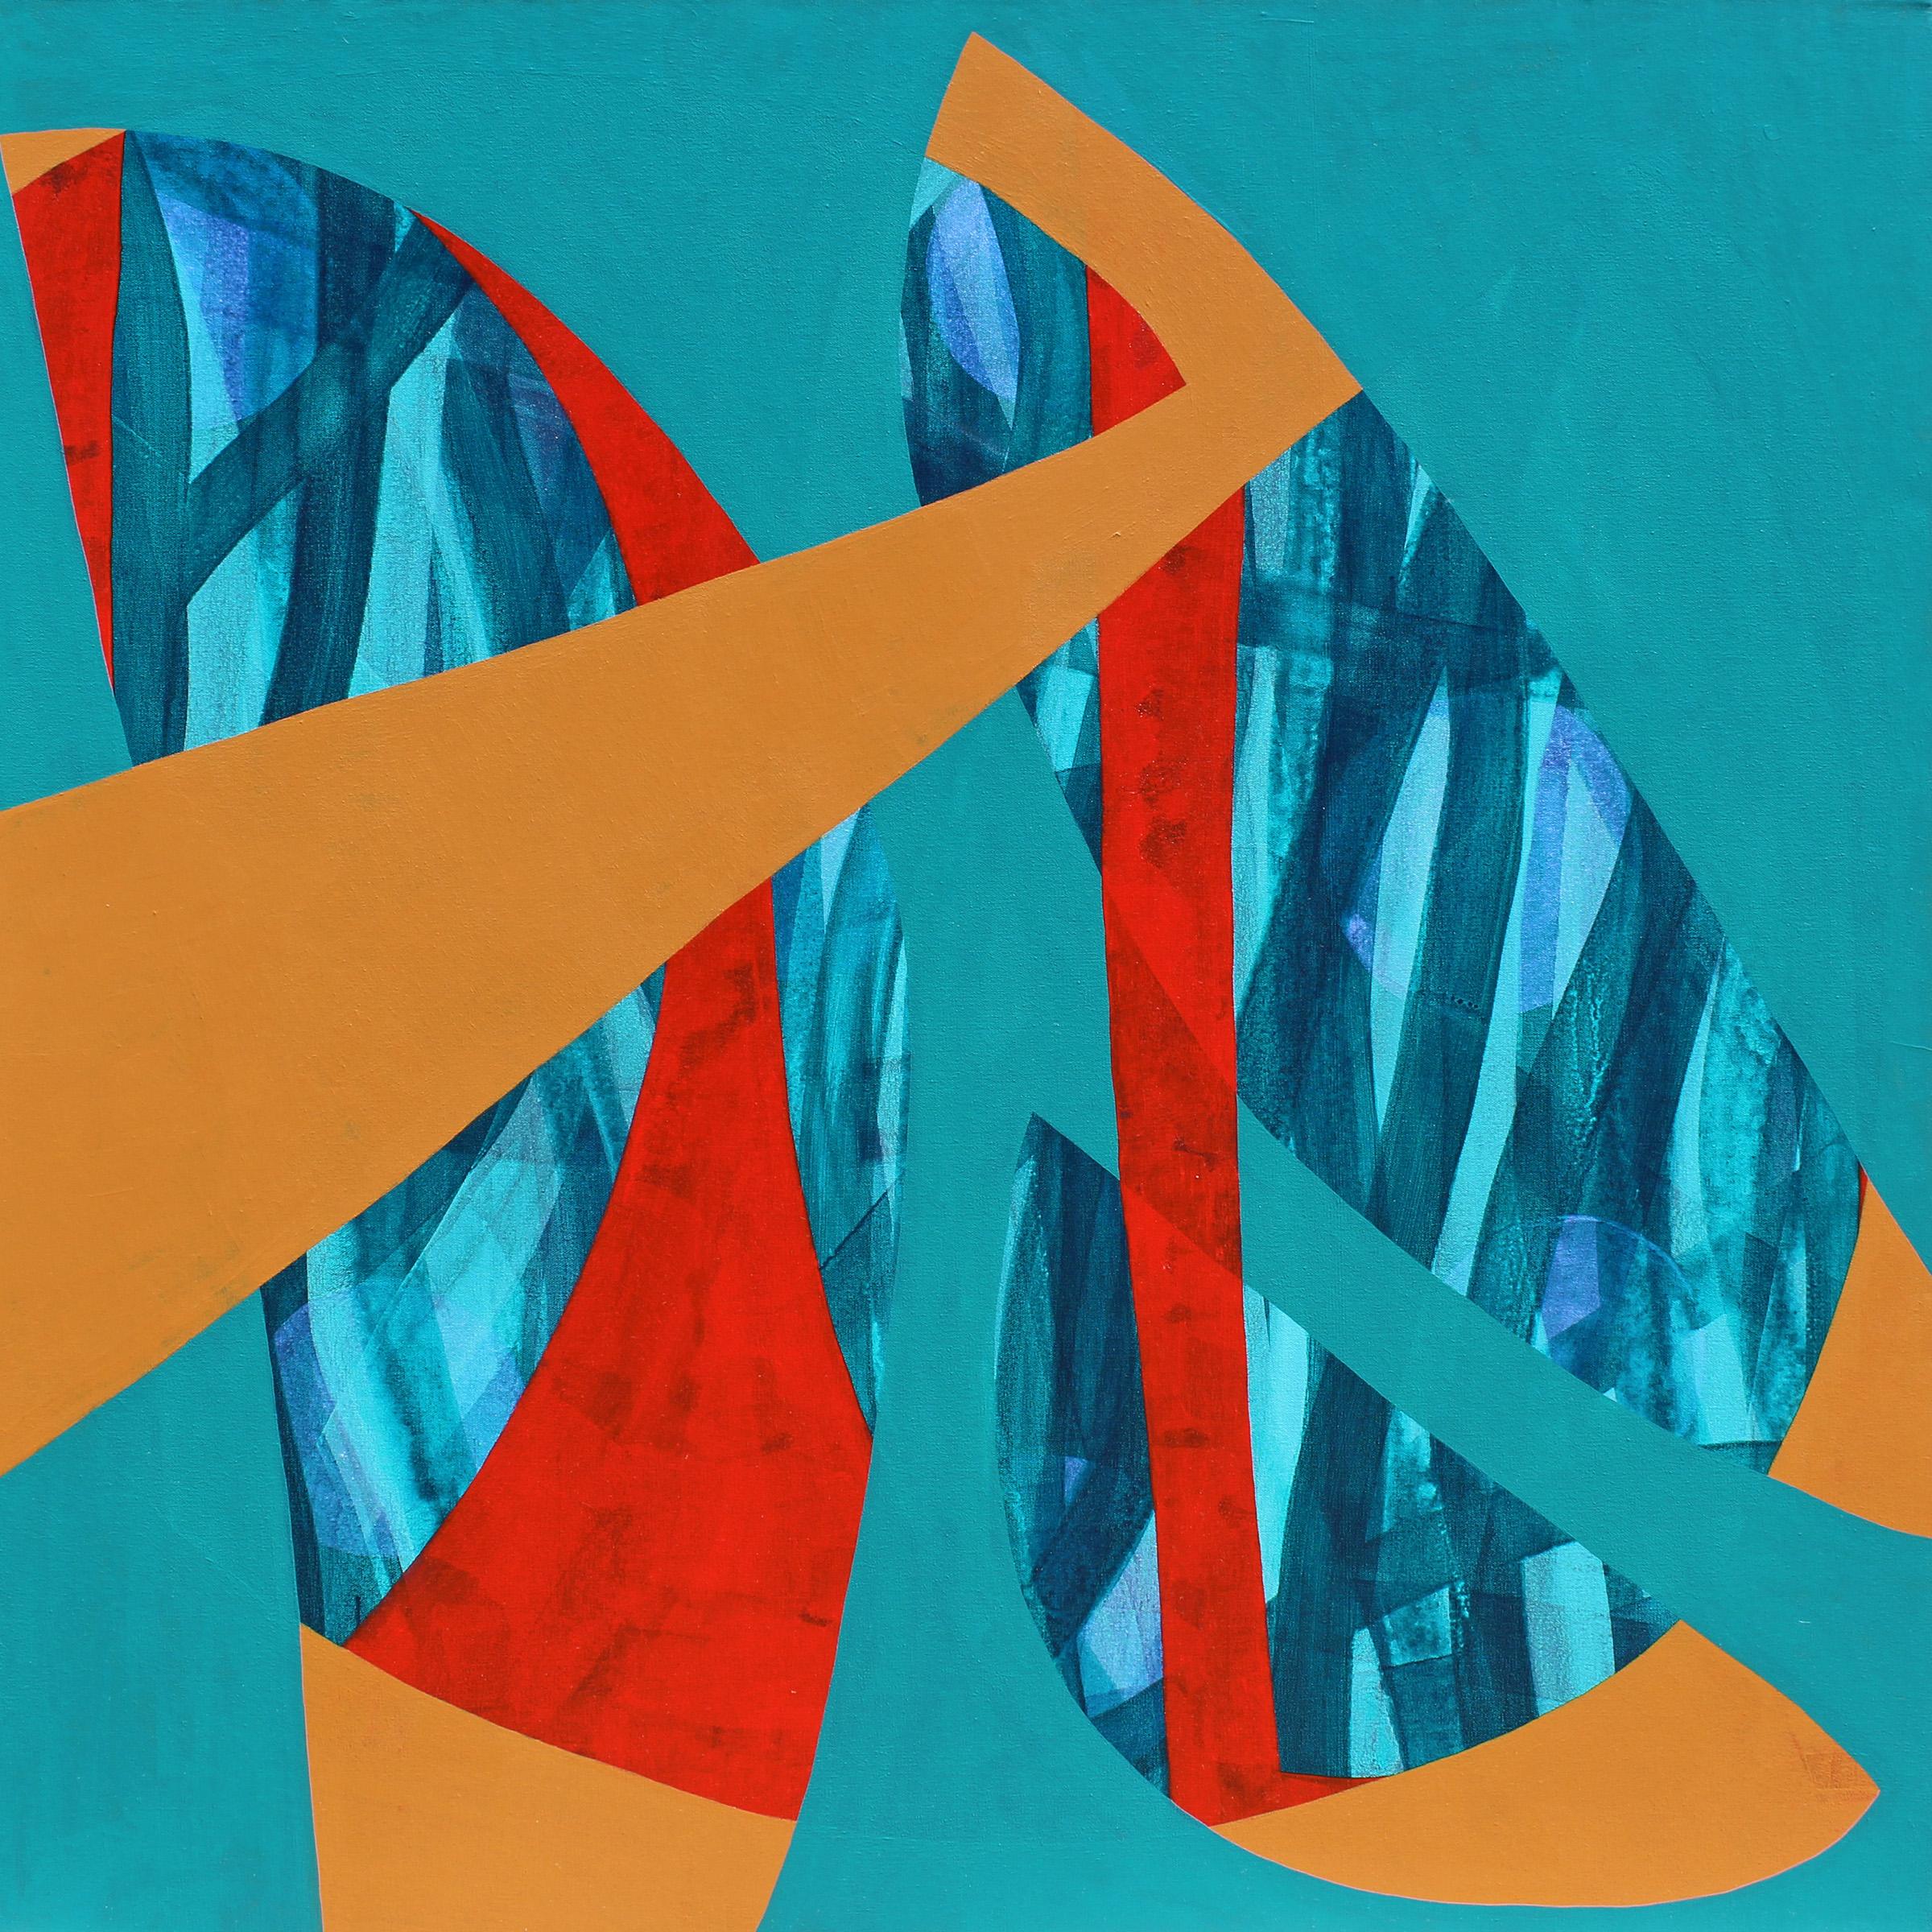 Laura Dargan Abstract Painting - "Fireflies Two" - Colorful Non-Objective Painting - Bold Shapes - Sonia Delaunay